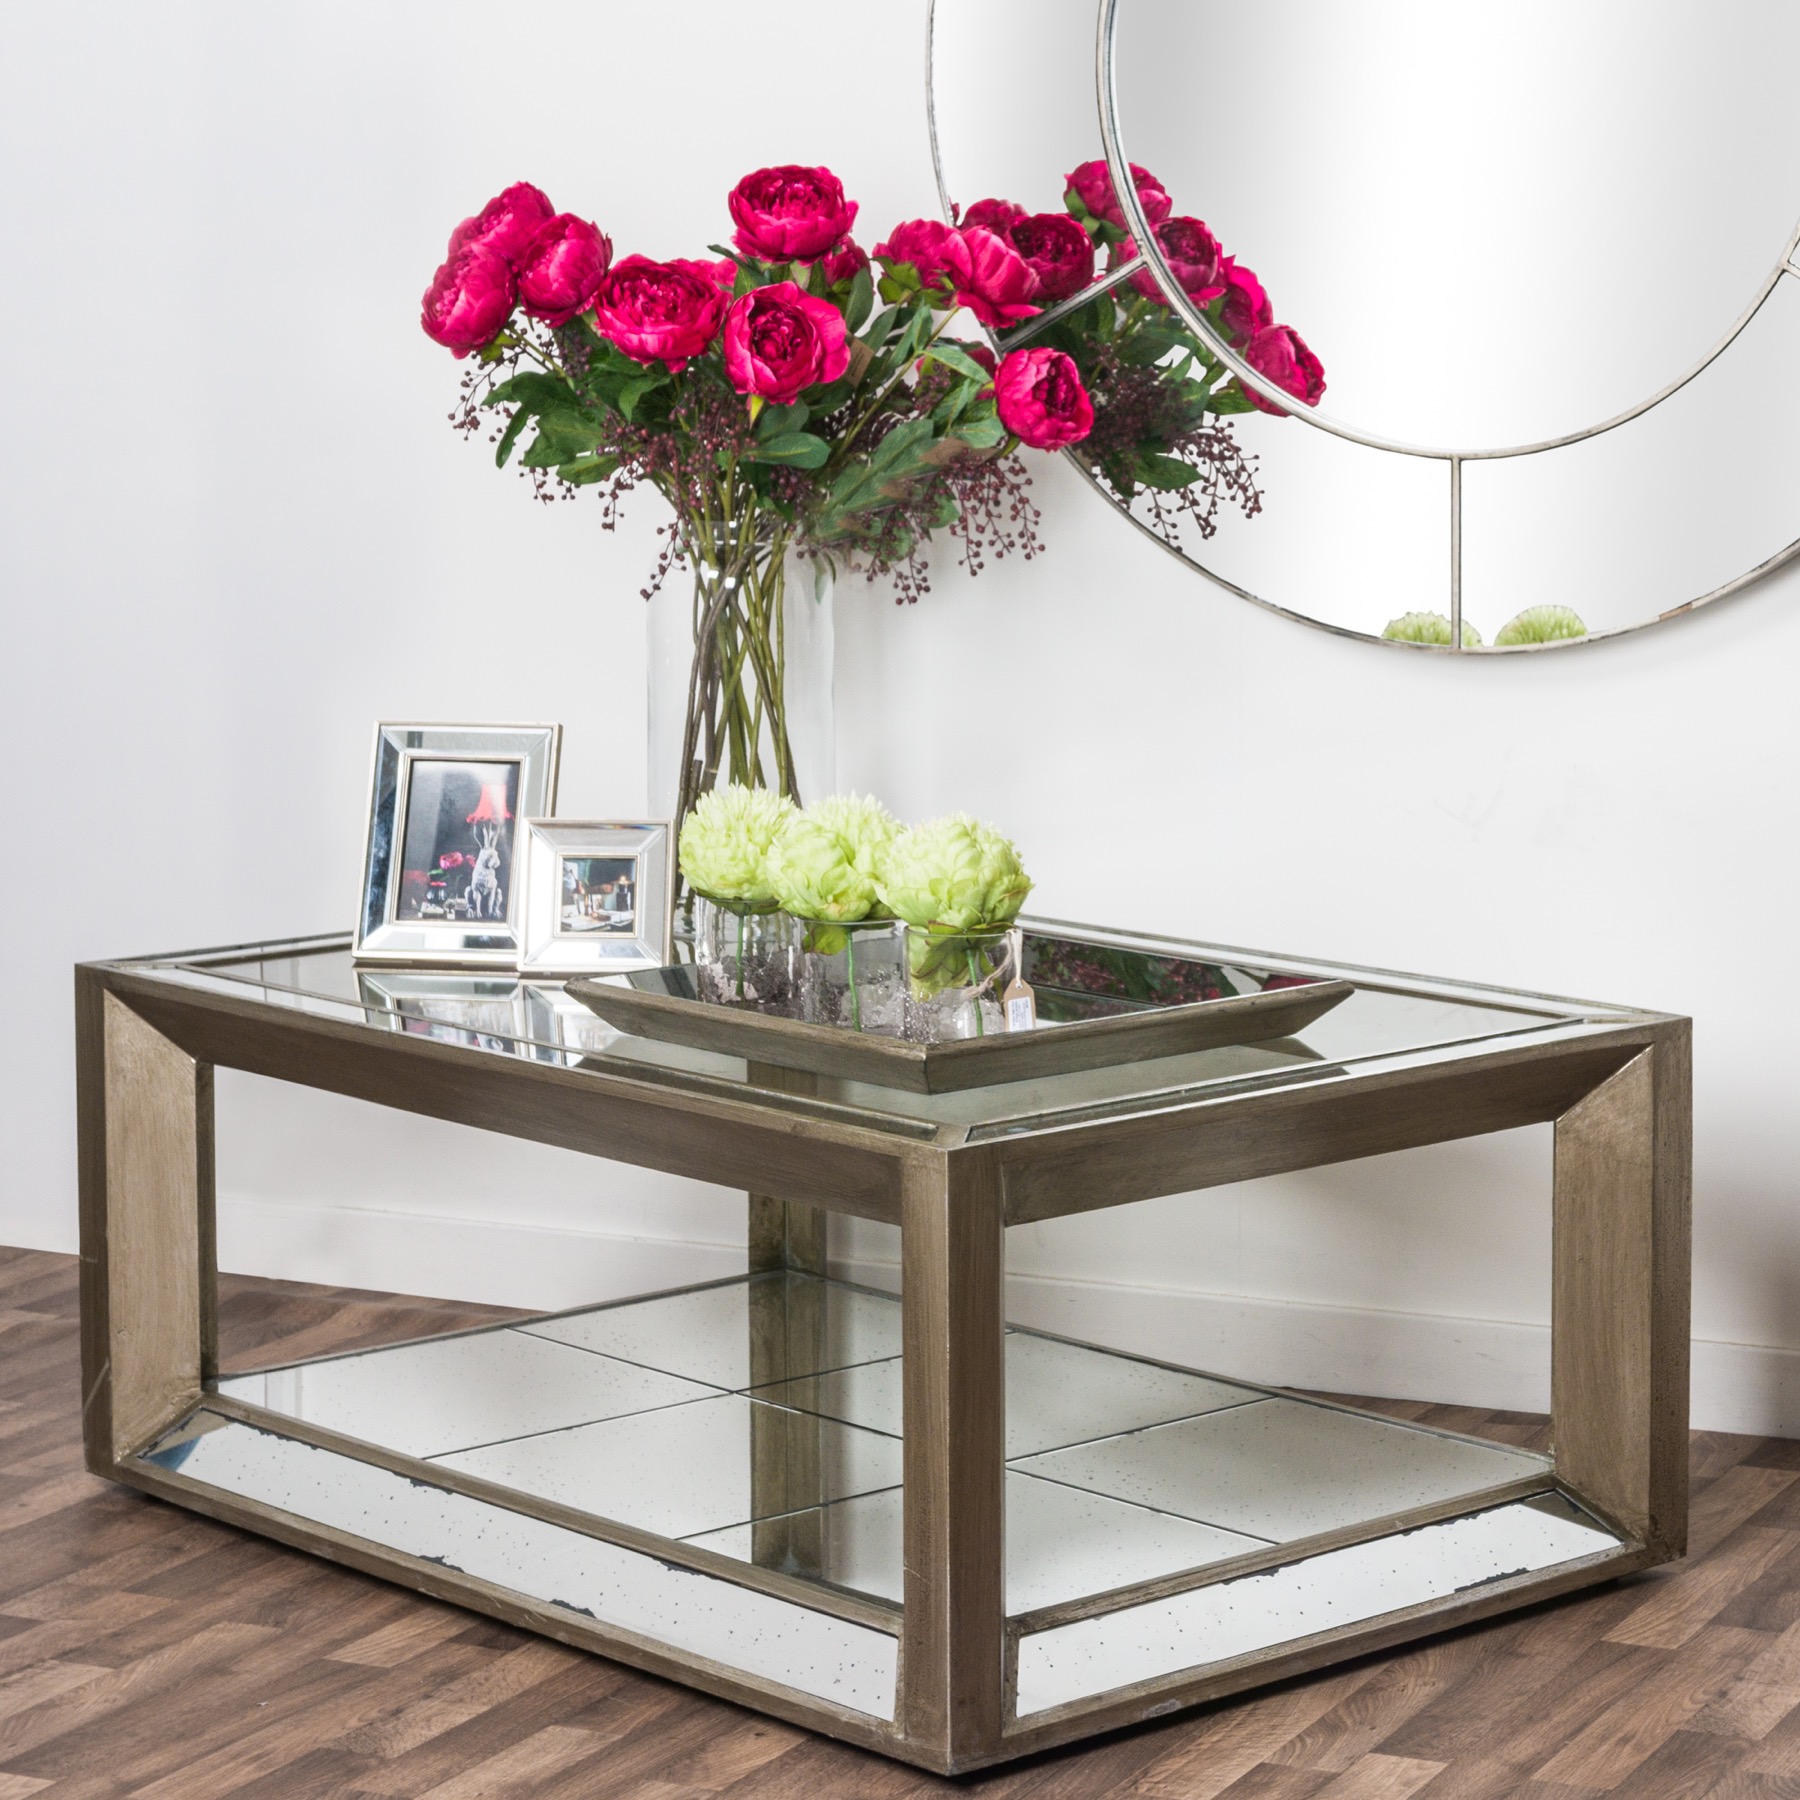 Large Augustus Mirrored Coffee Table - Image 4